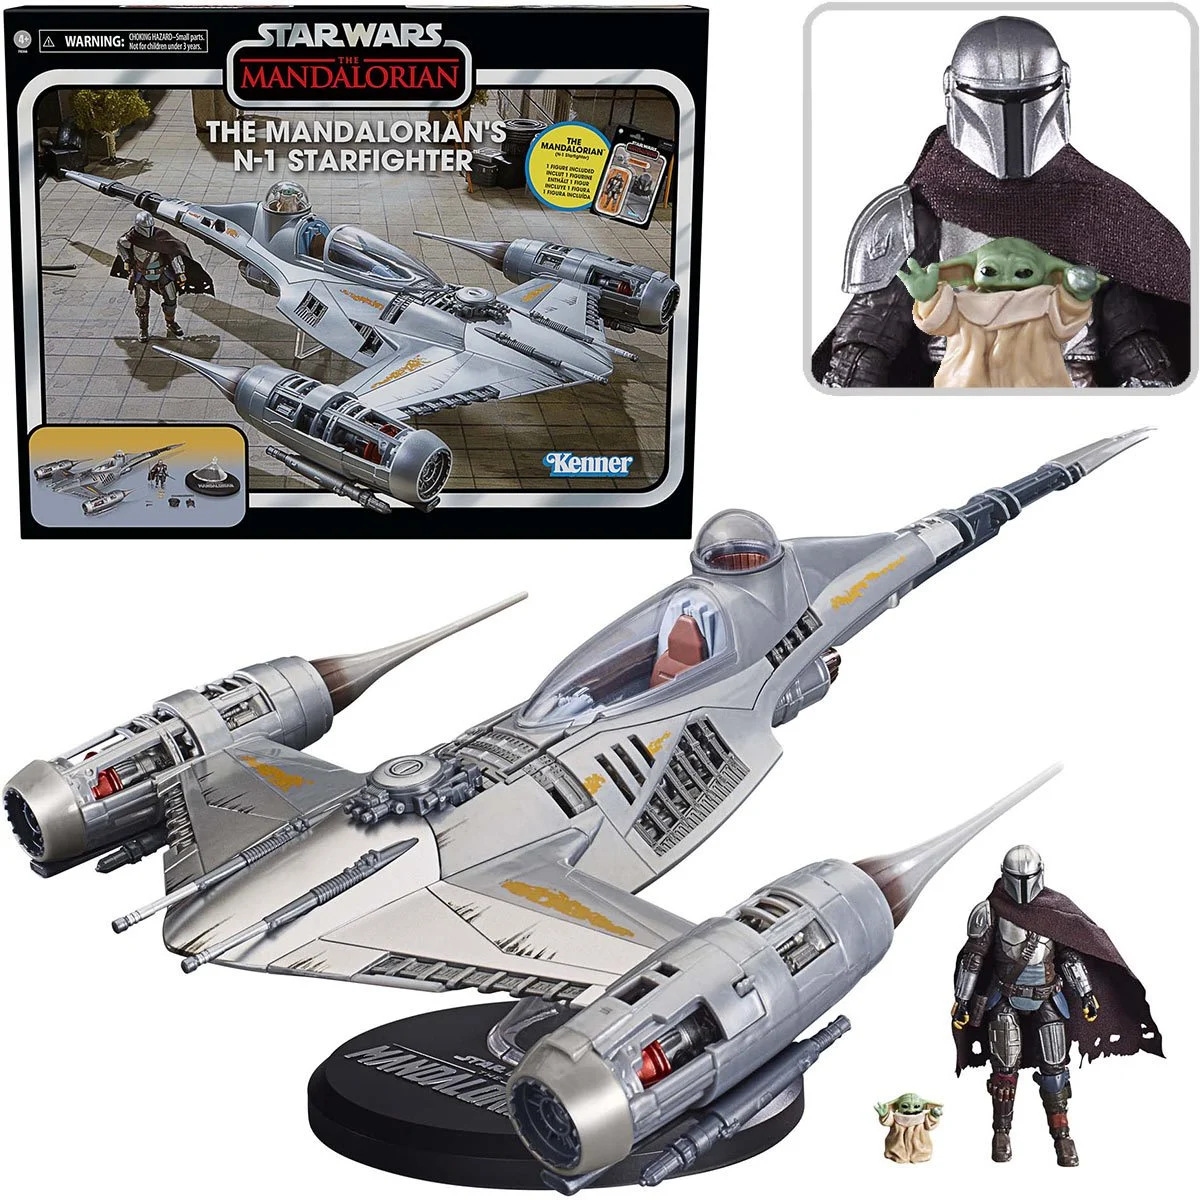 Star Wars The Vintage Collection The Mandalorian’s N-1 Starfighter Vehicle HSF8366 5010996169785